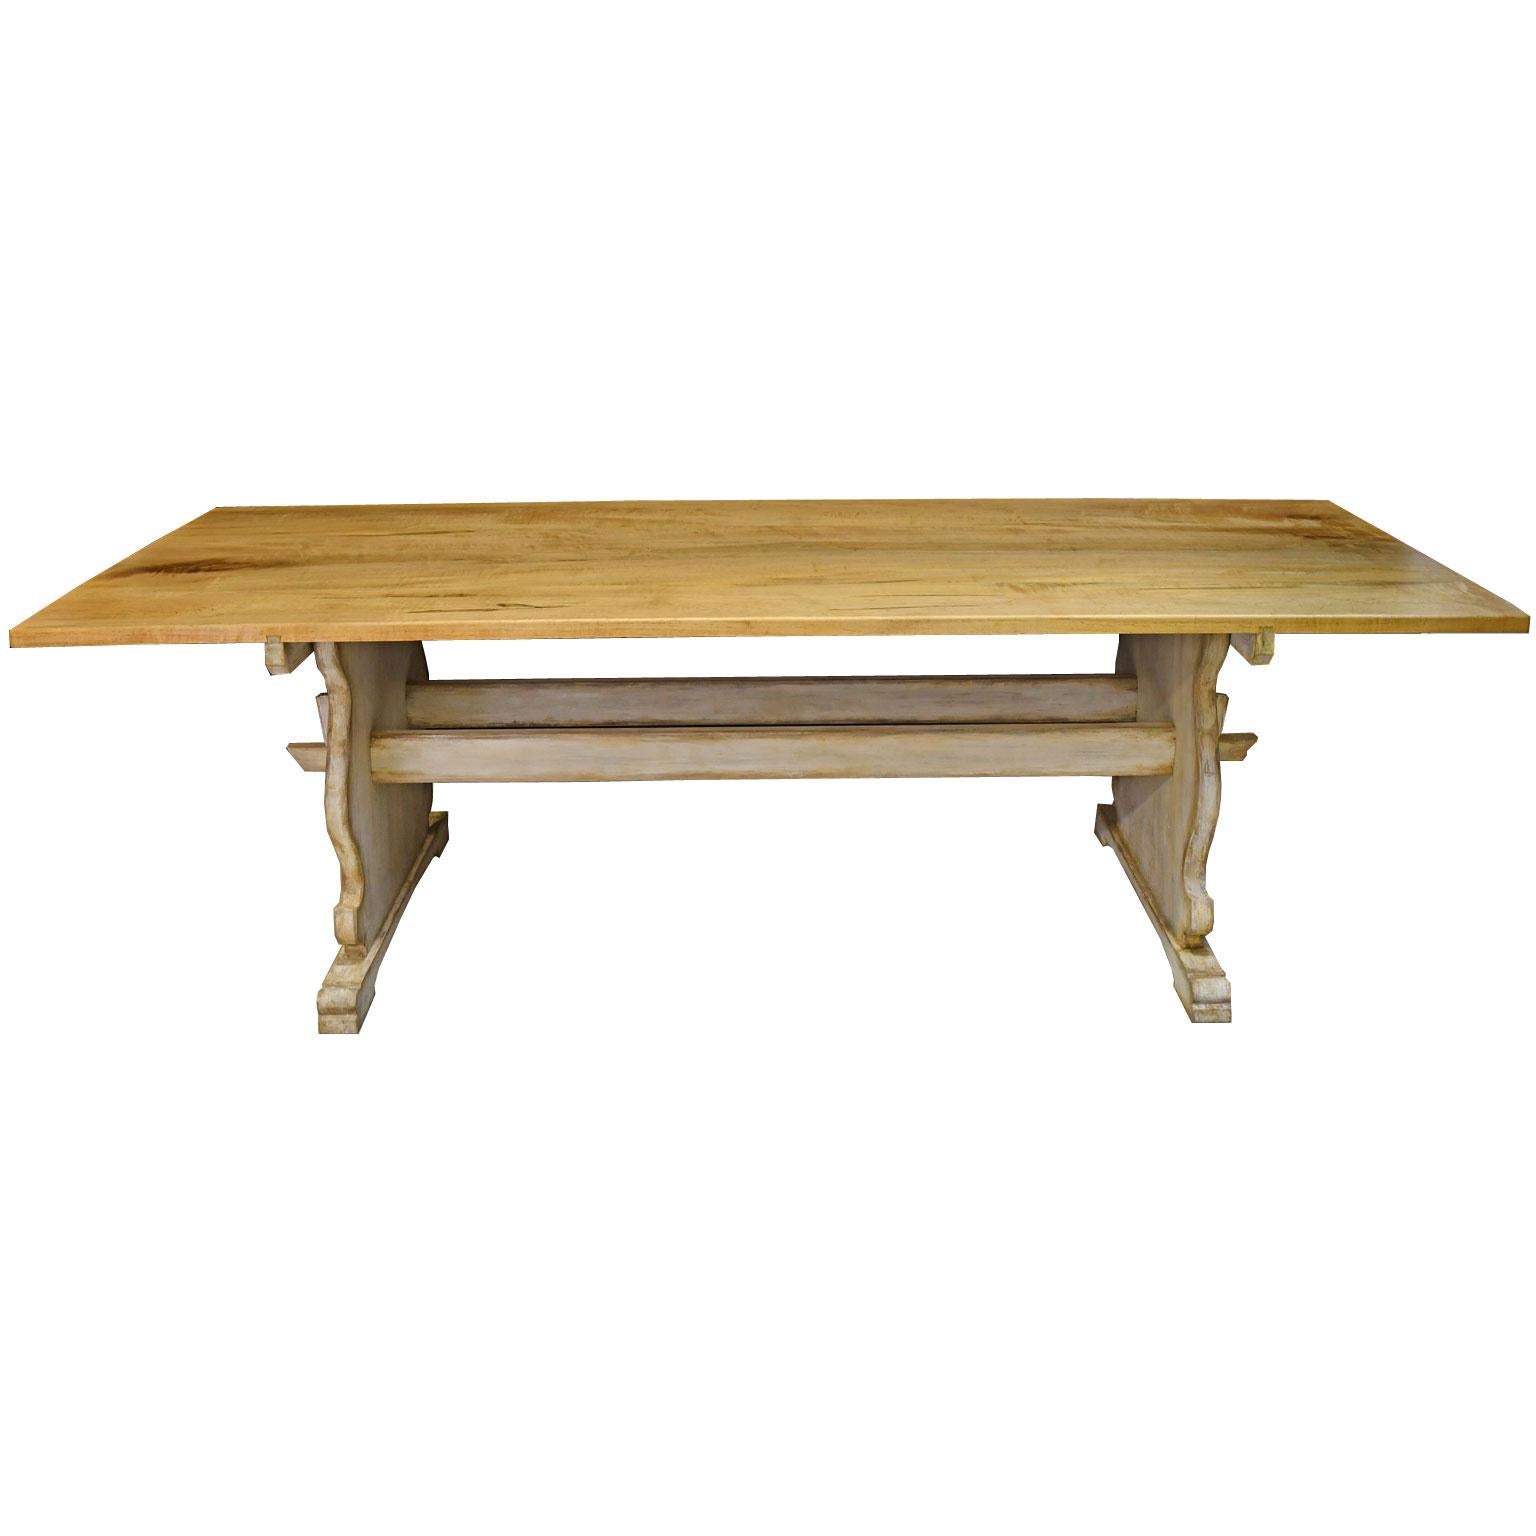 Inspired by an 18th century Swedish-Gustavian table that is in our inventory, this very handsome and solidly-built dining table was fabricated in our workshop. Table may be purchased with a maple, walnut or cherry top. The top, as shown in main